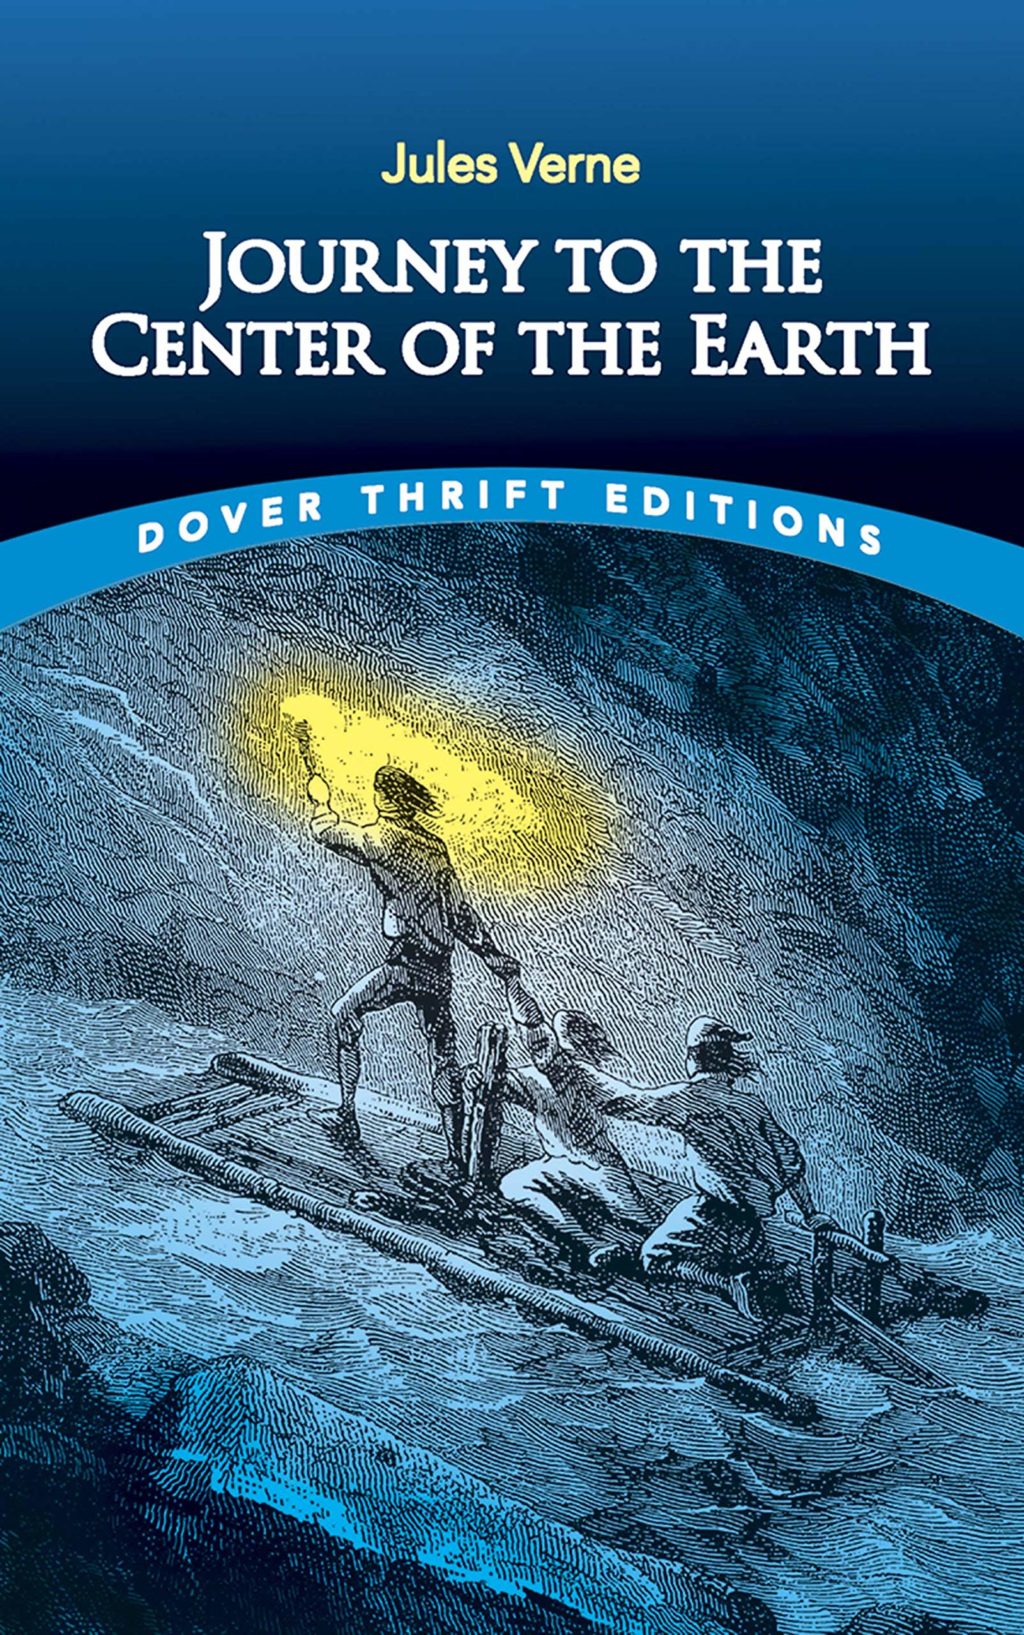 Journey to the Center of the Earth Book Review | Movie Reviews Simbasible